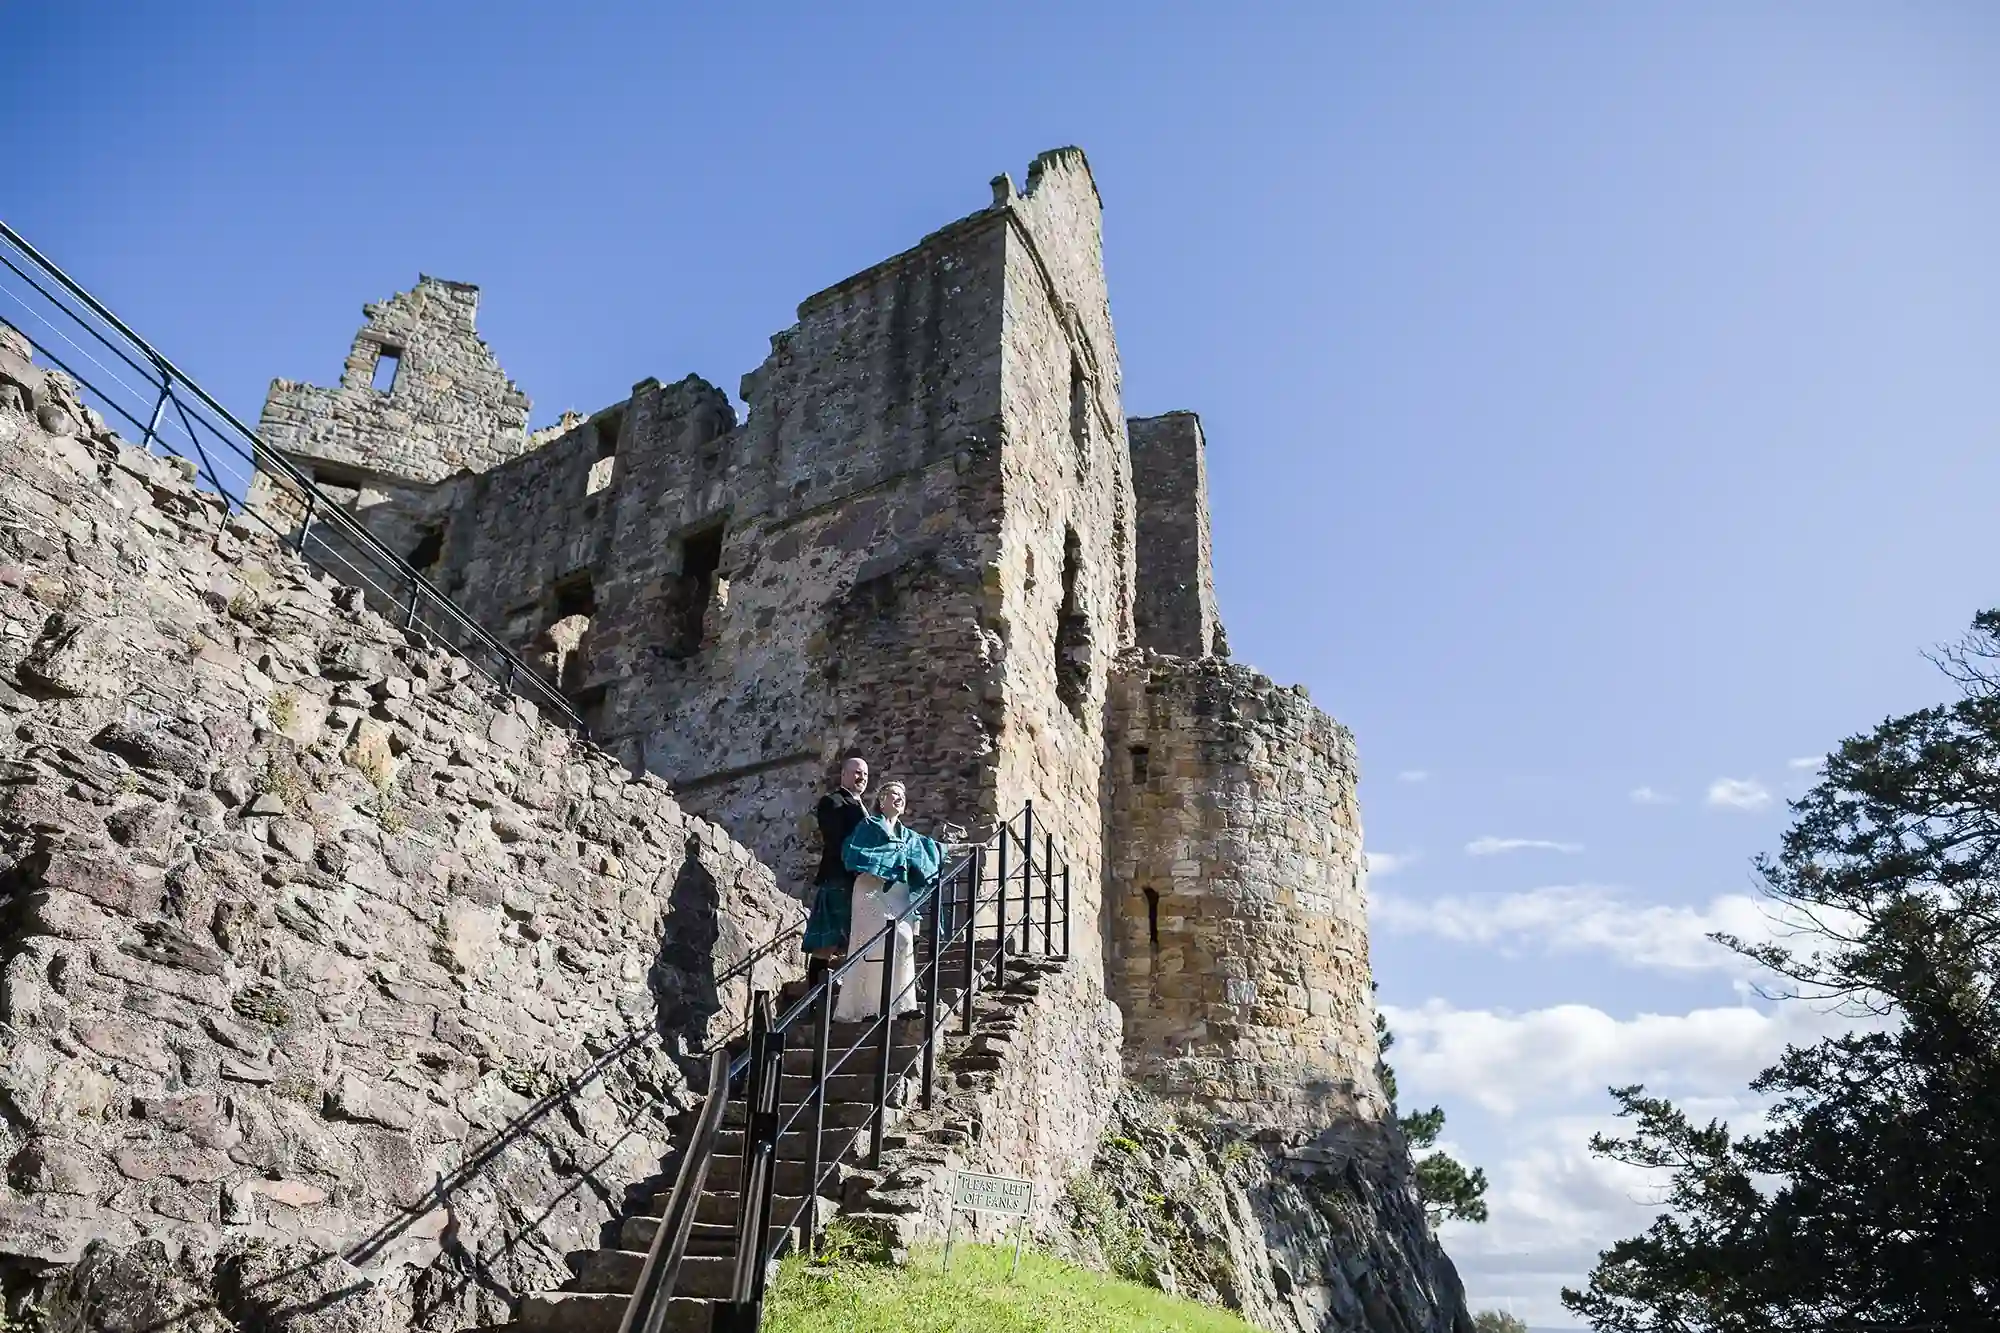 Two people smiling on a staircase beside the ruins of an ancient stone castle under a clear blue sky.